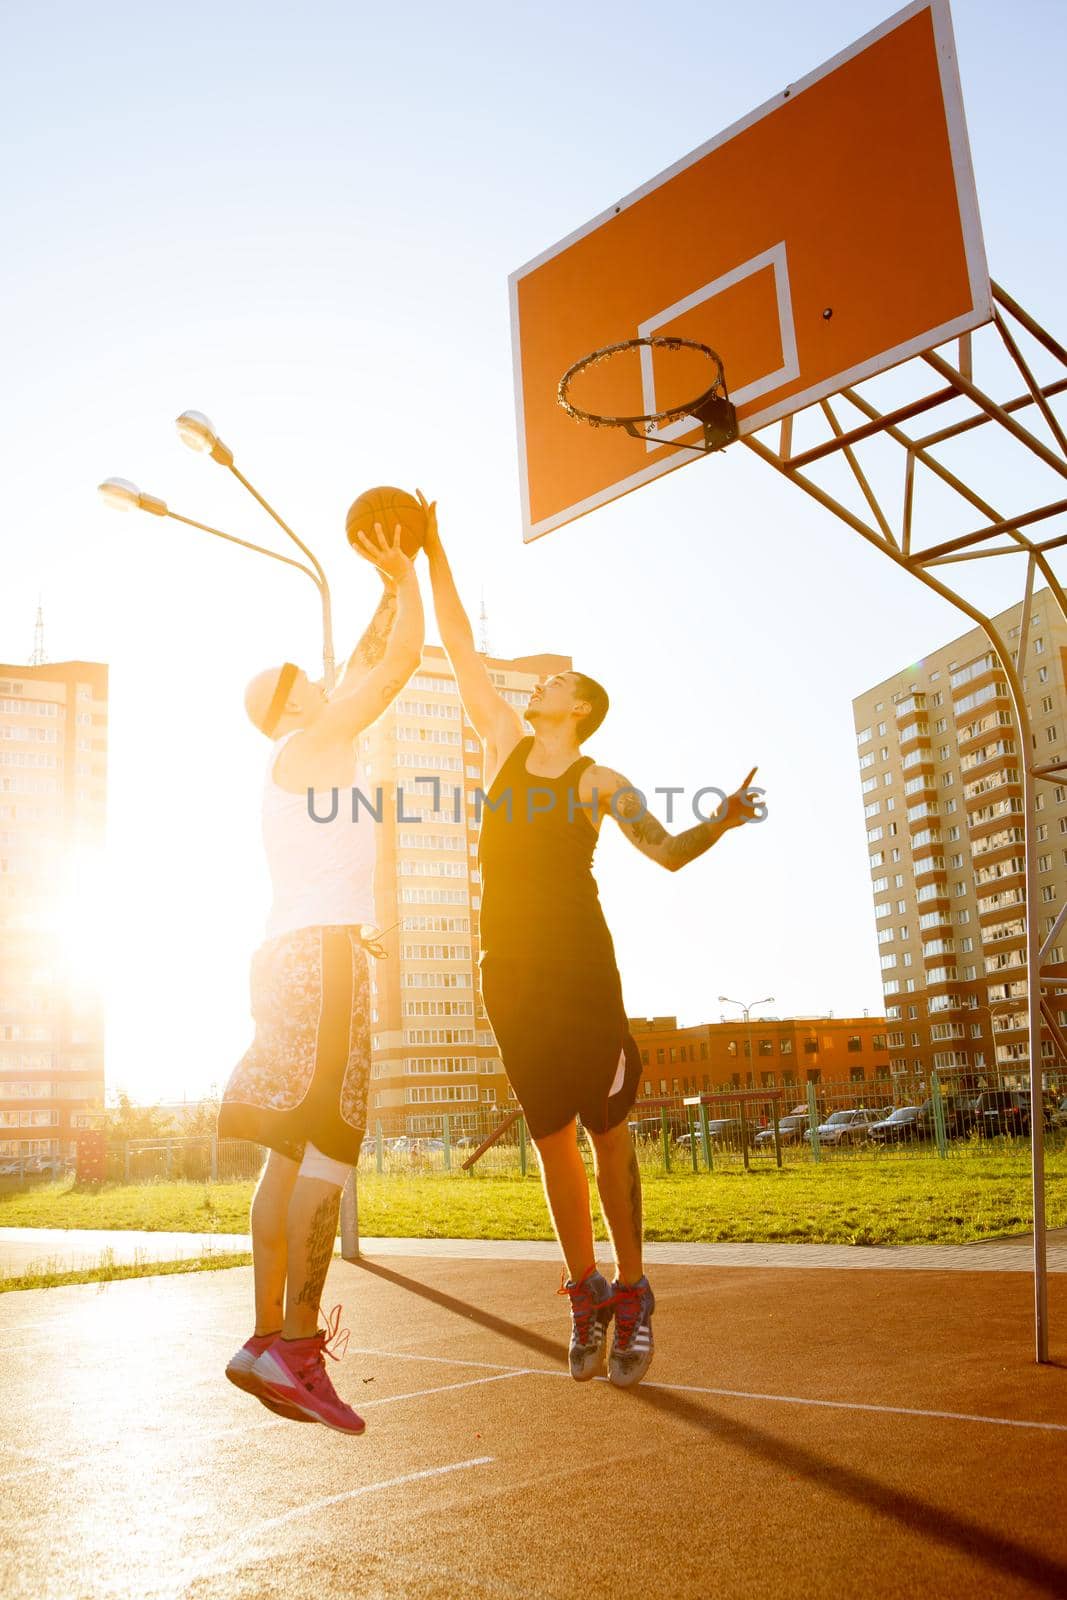 Two stylish guy play basketball at district sports ground against a backdrop of high-rise residential buildings. Solar flare in the frame.